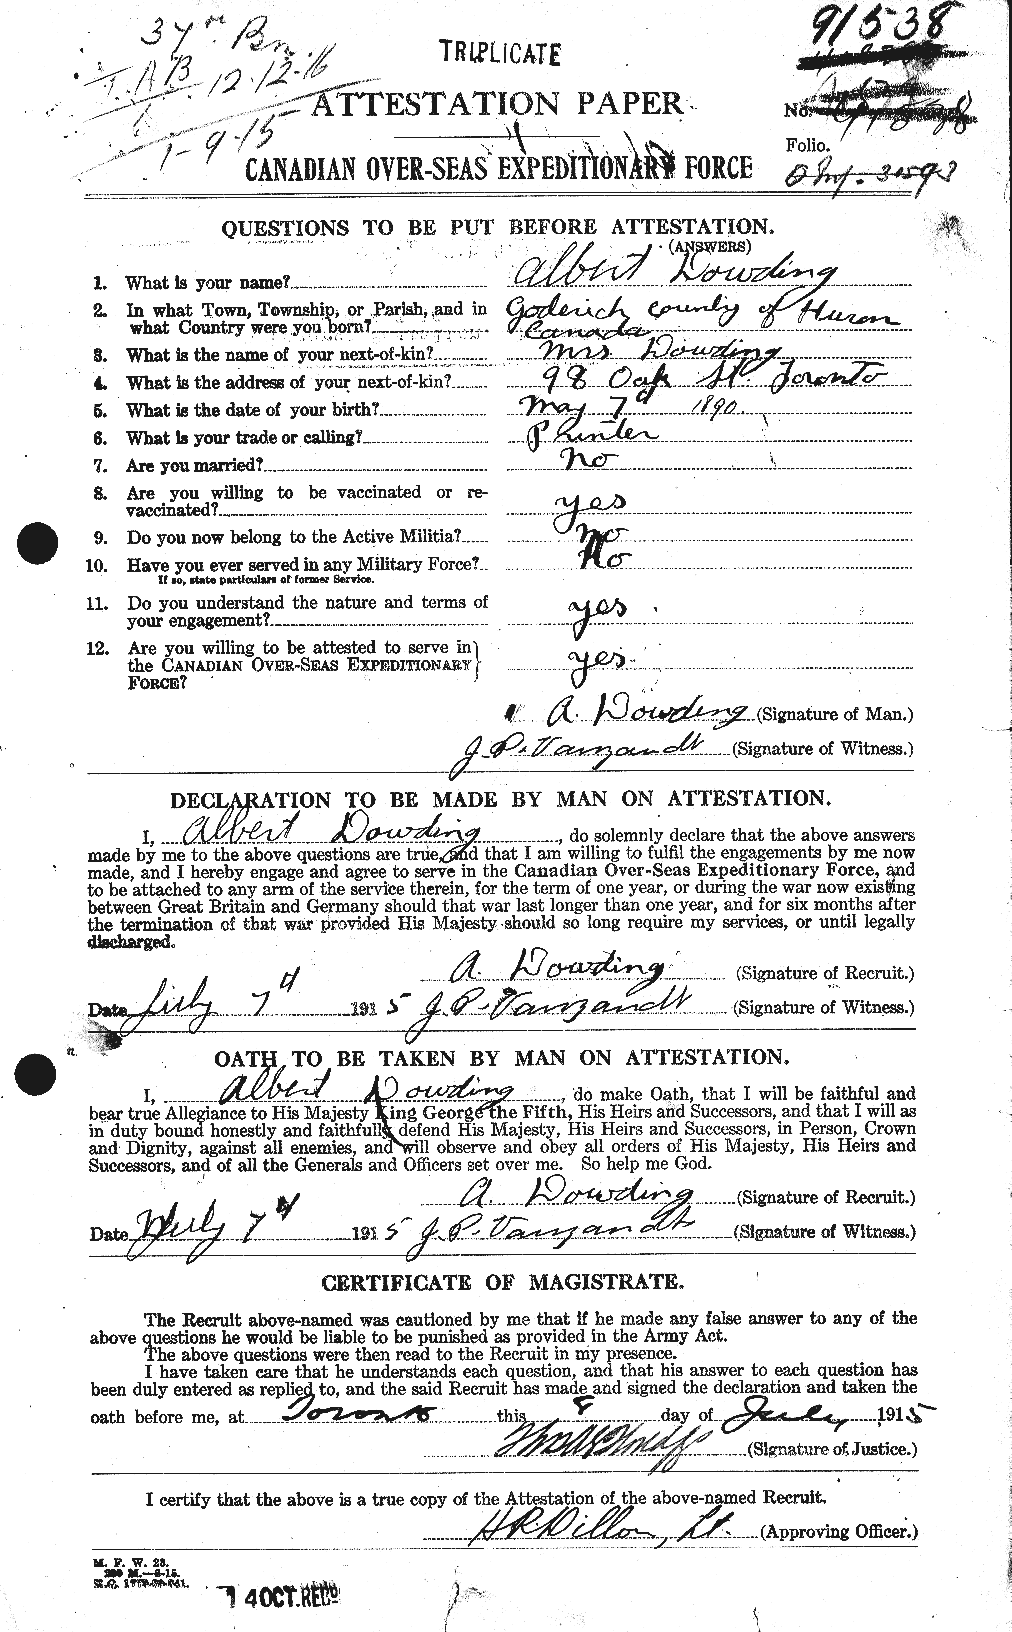 Personnel Records of the First World War - CEF 299259a